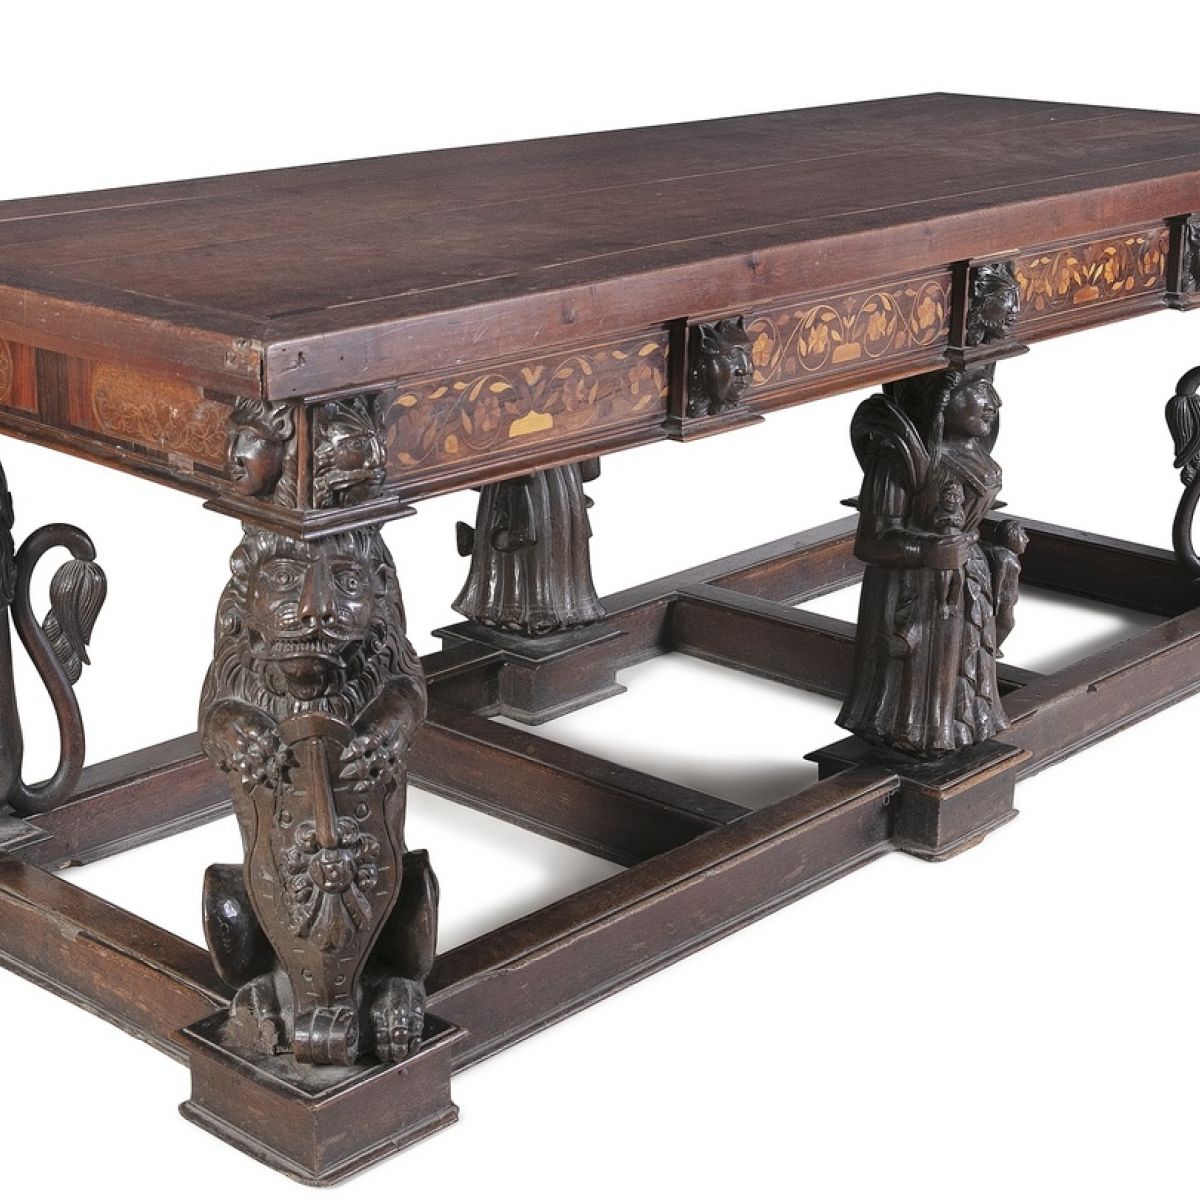 Table Formed From Spanish Armada Parts Up For Auction